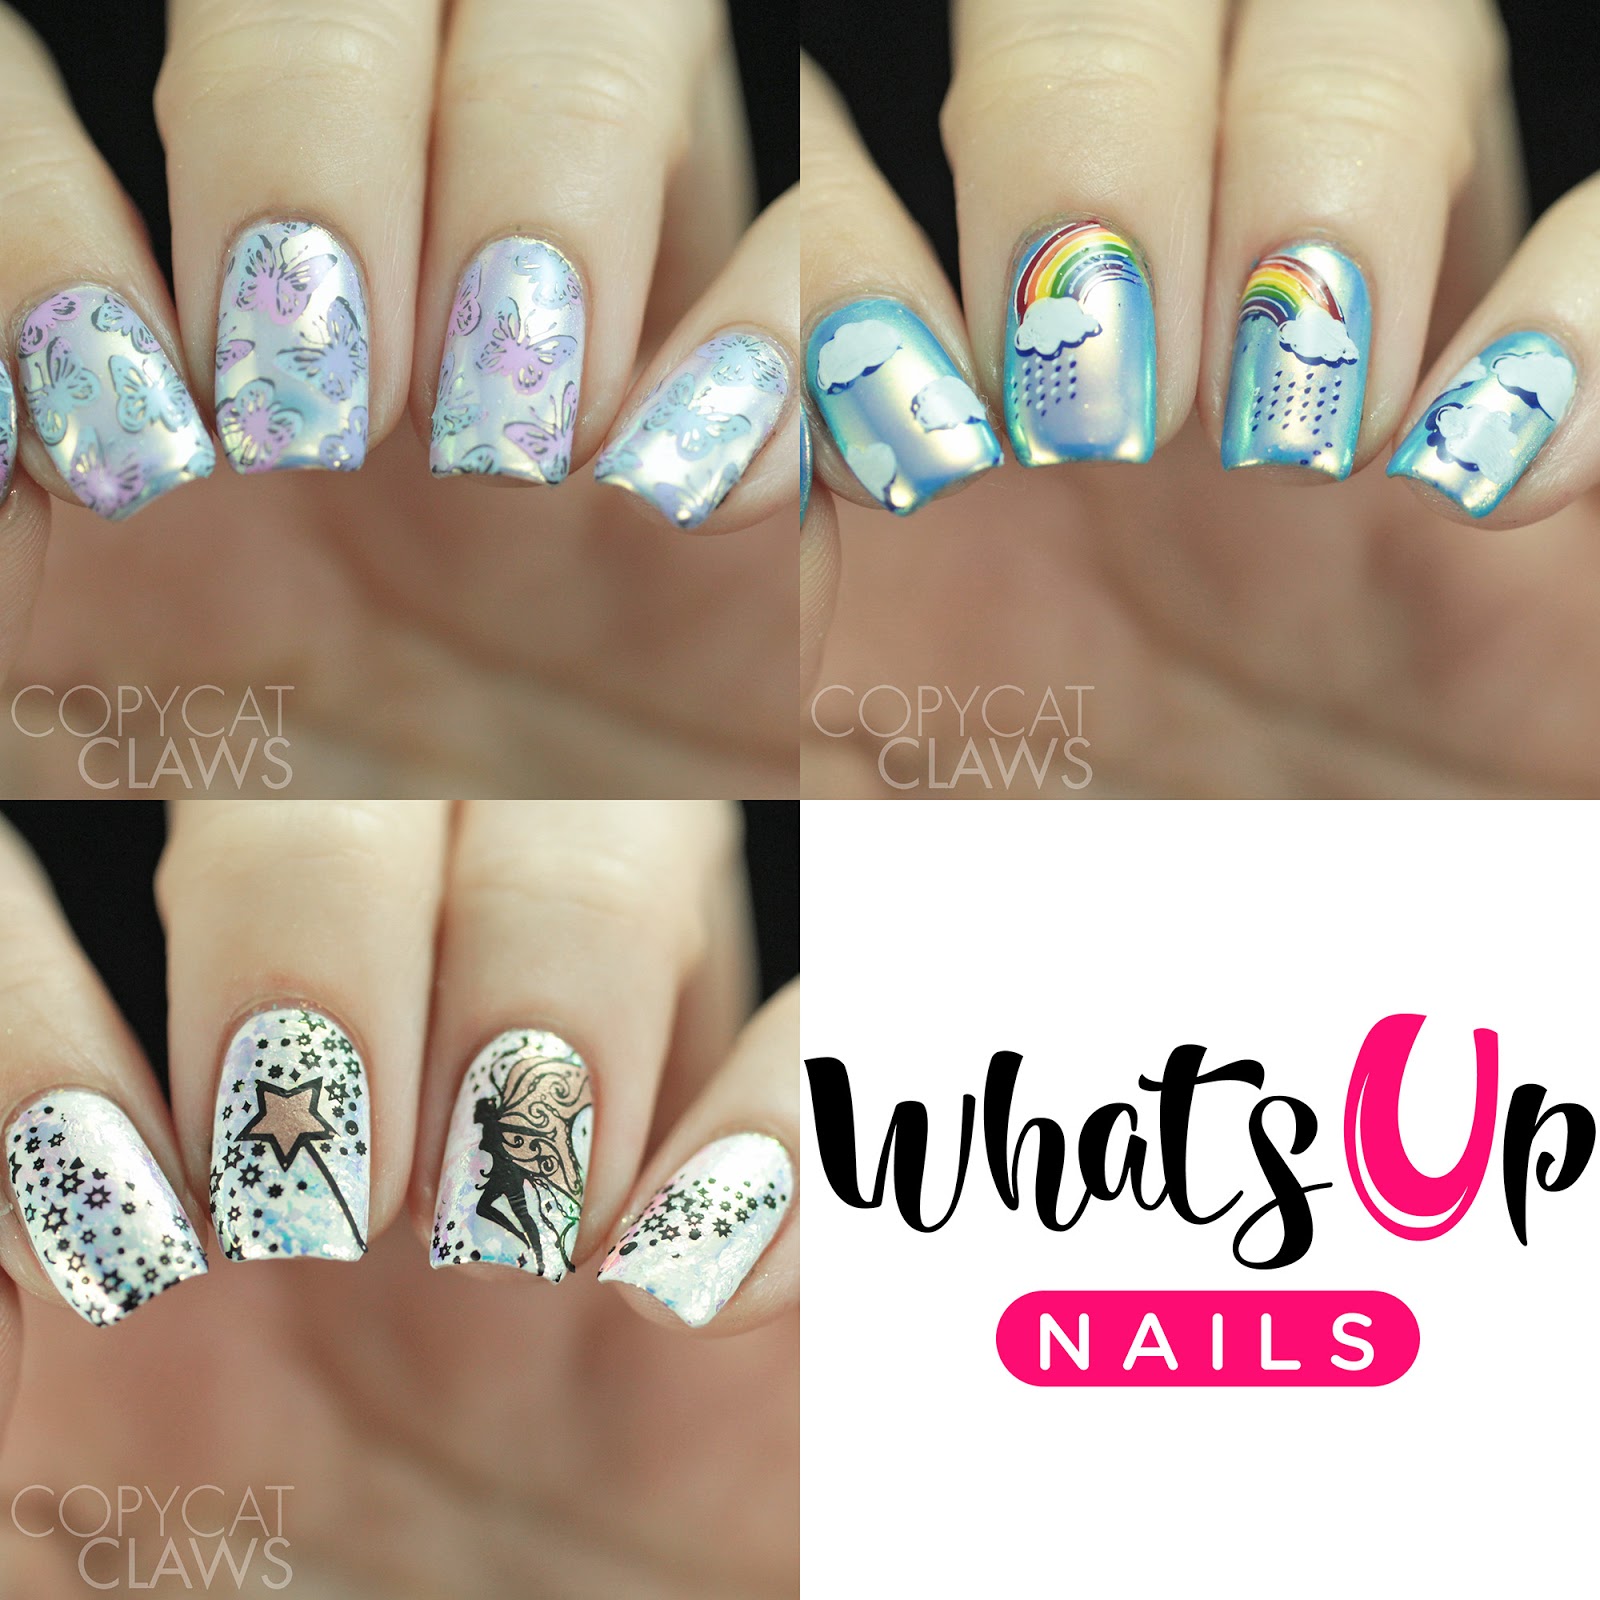 Copycat Claws: Whats Up Nails Aurora Supreme Comparison and Review